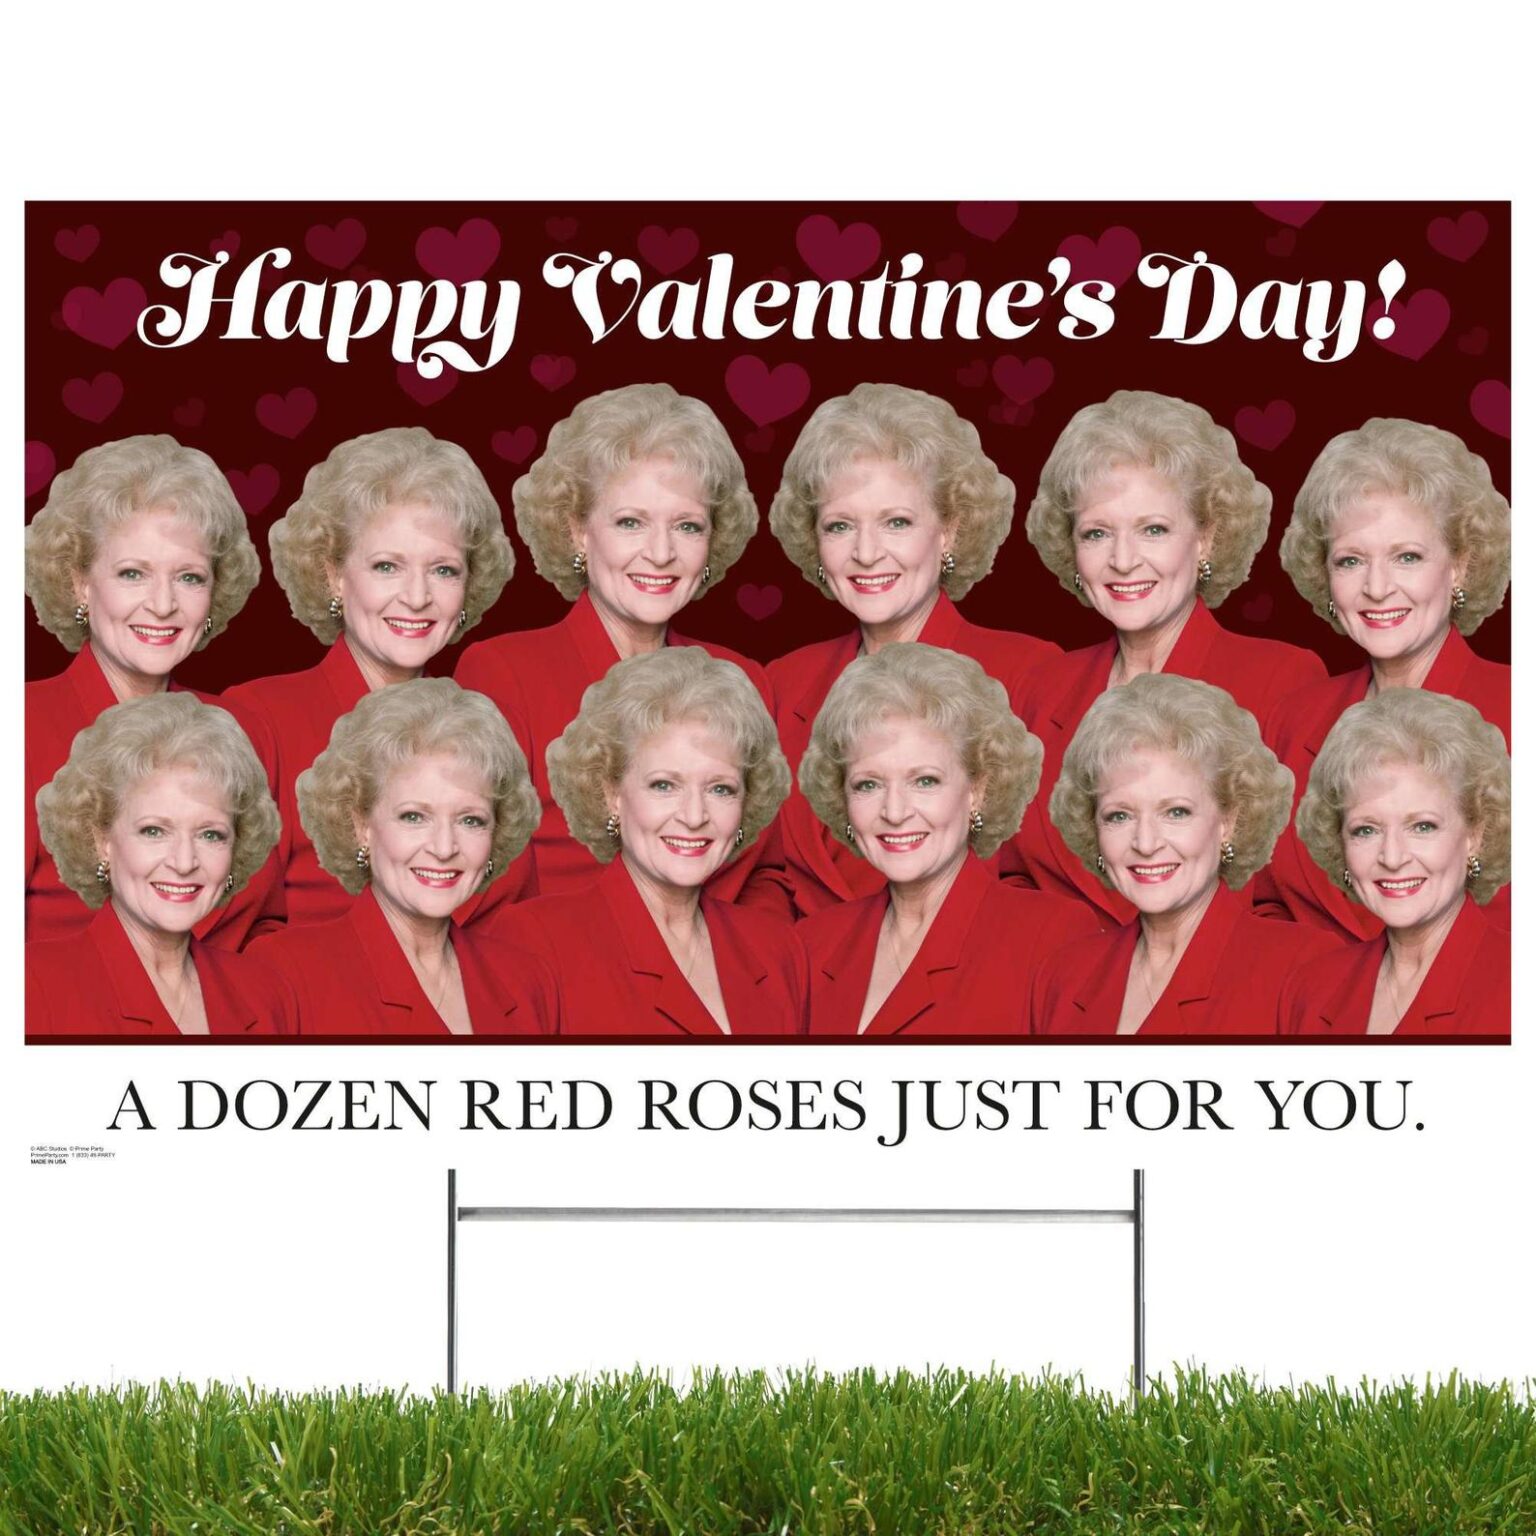 You Can Get A Dozen Red Roses To Give To That Golden Girls Fan In Your Life 6348